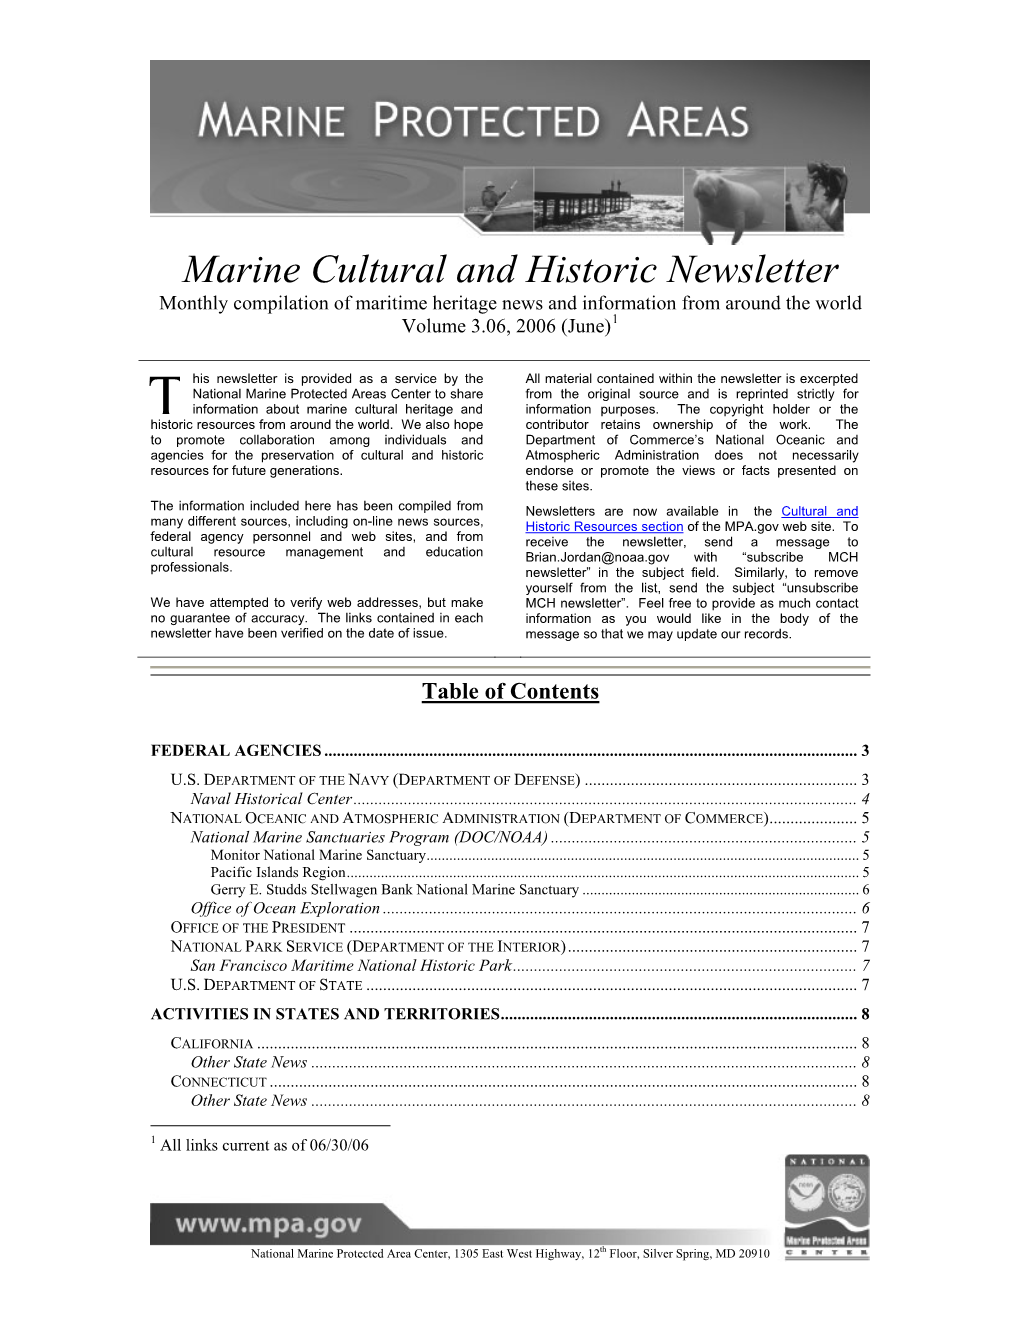 Marine Cultural and Historic Newsletter Vol 3(6)